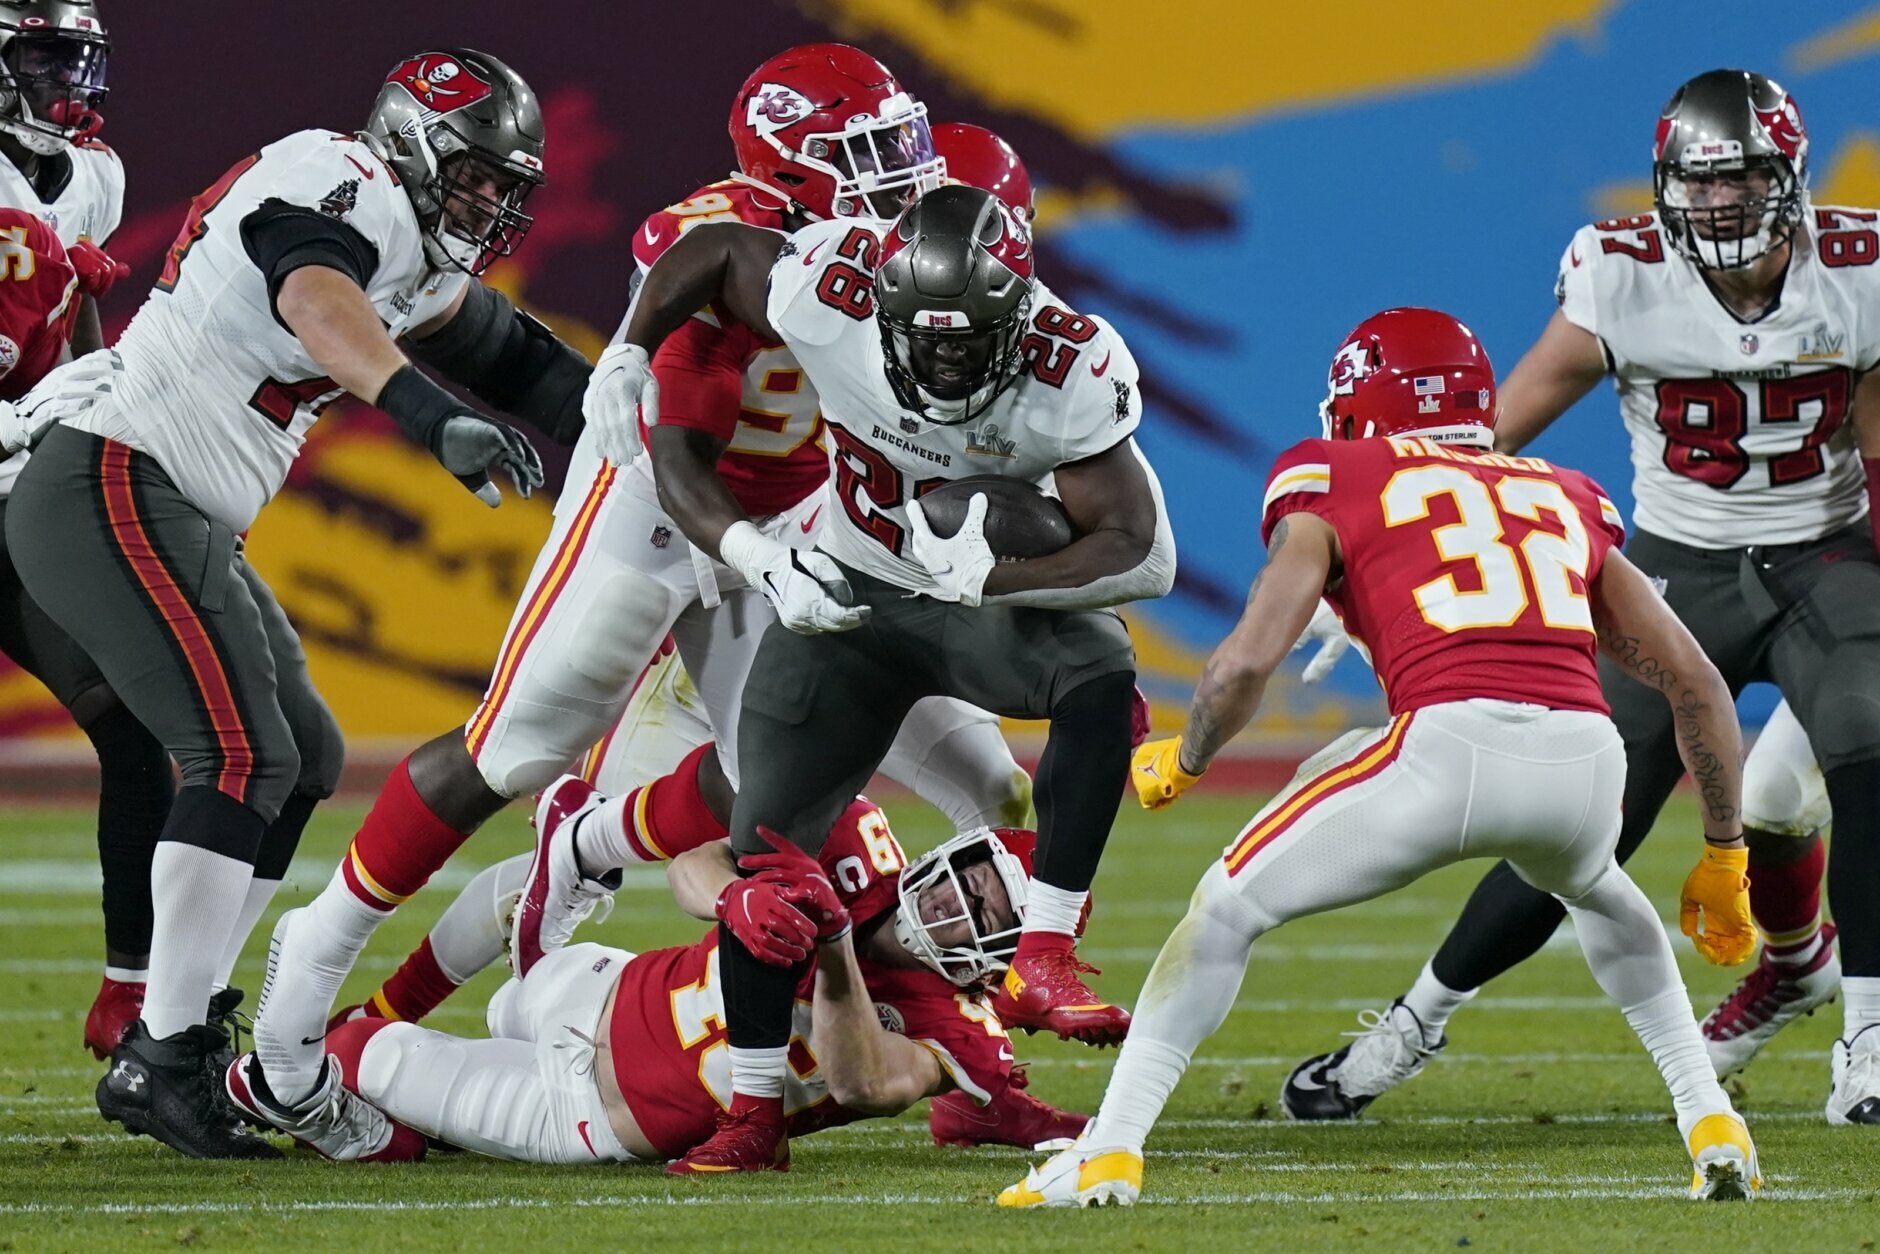 Kansas City Chiefs free safety Daniel Sorensen grabs the leg of Tampa Bay Buccaneers running back Leonard Fournette during the first half of the NFL Super Bowl 55 football game Sunday, Feb. 7, 2021, in Tampa, Fla. (AP Photo/Mark Humphrey)